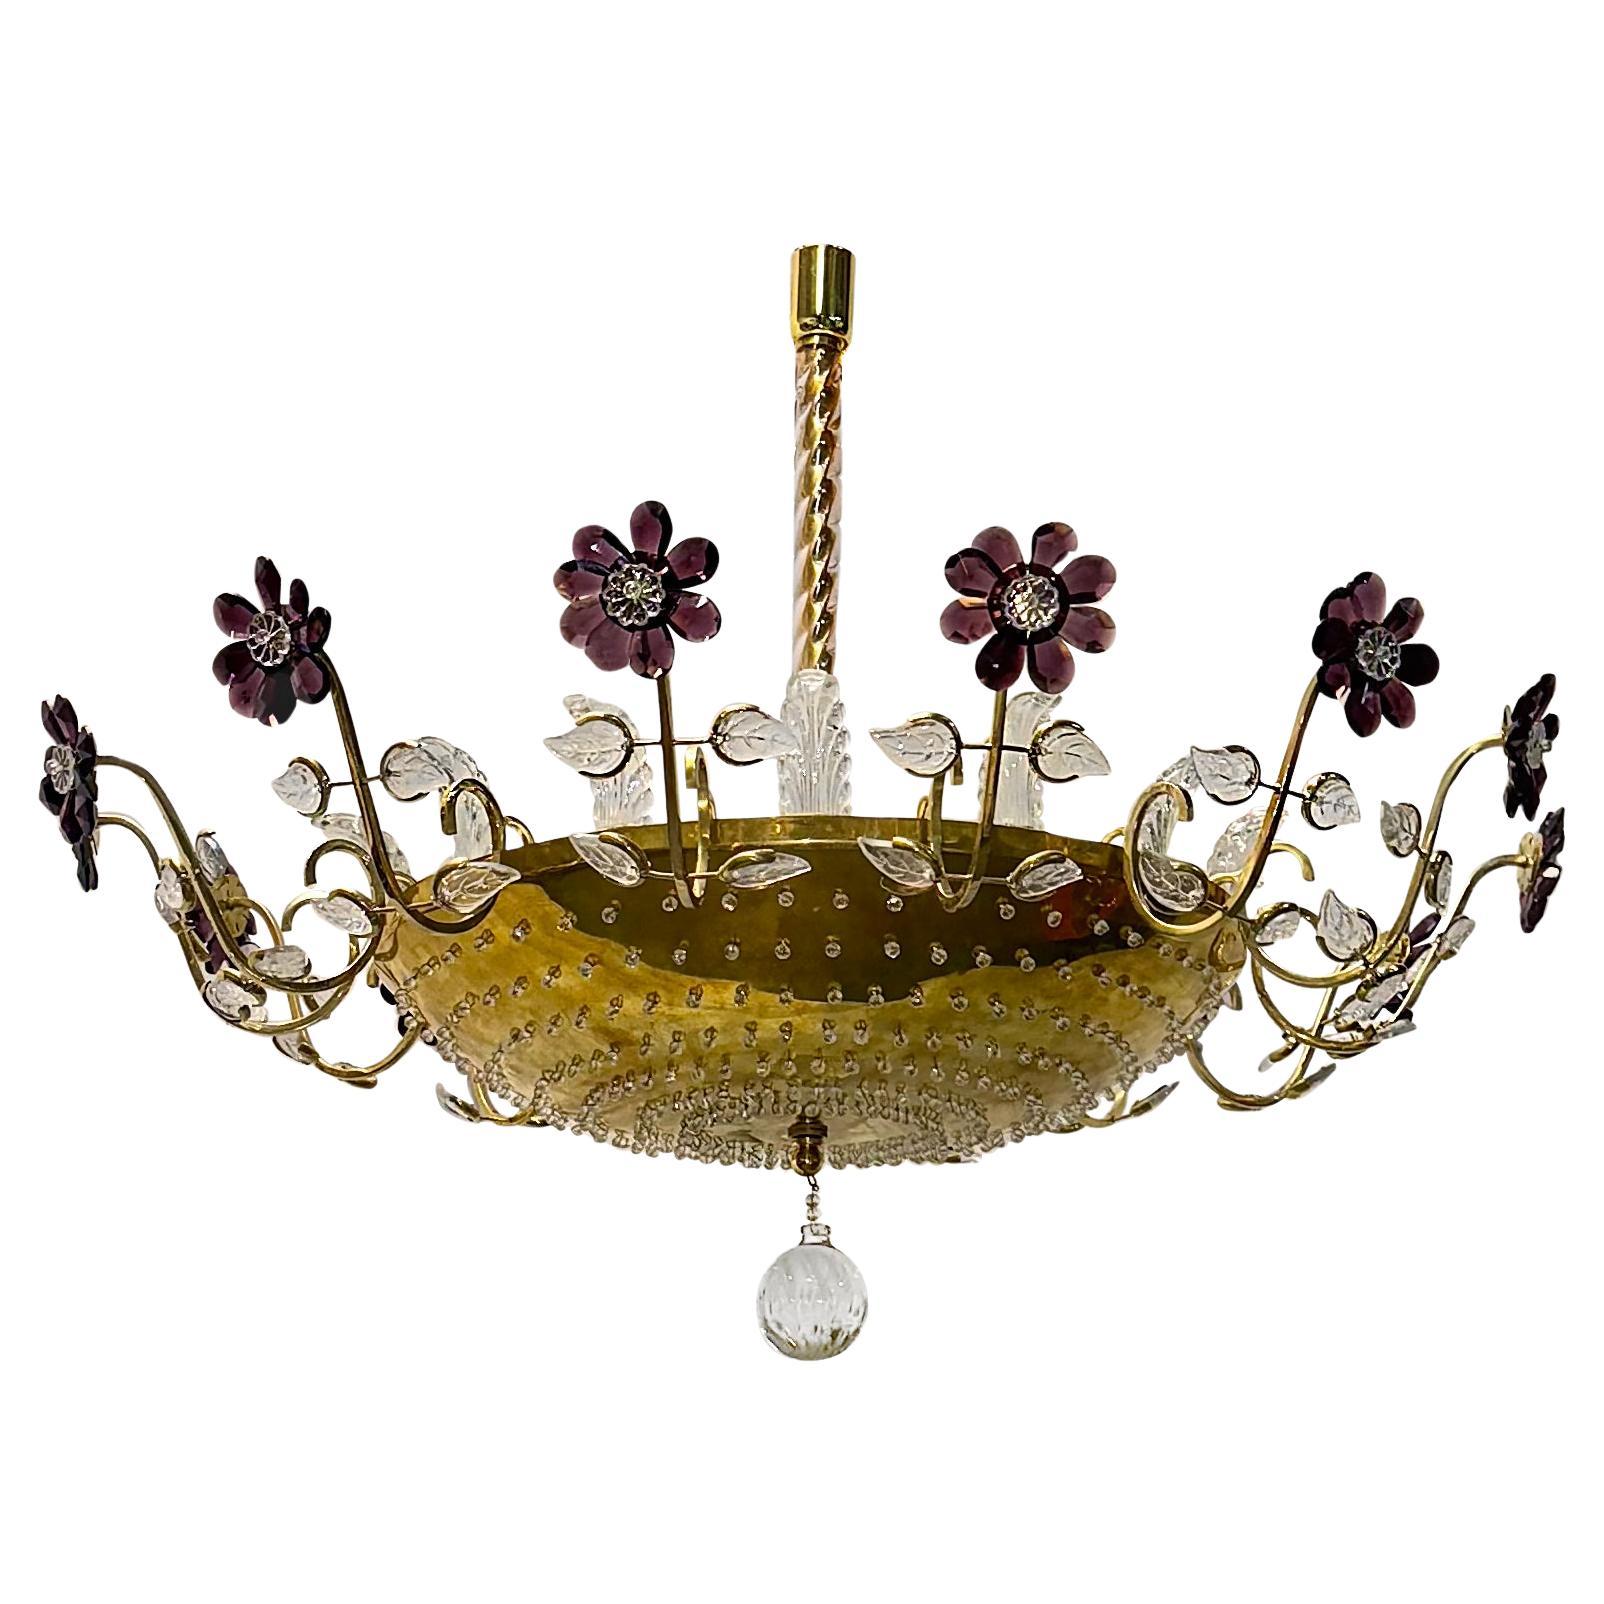 Gilt Metal Fixture with Amethyst Crystal Flowers